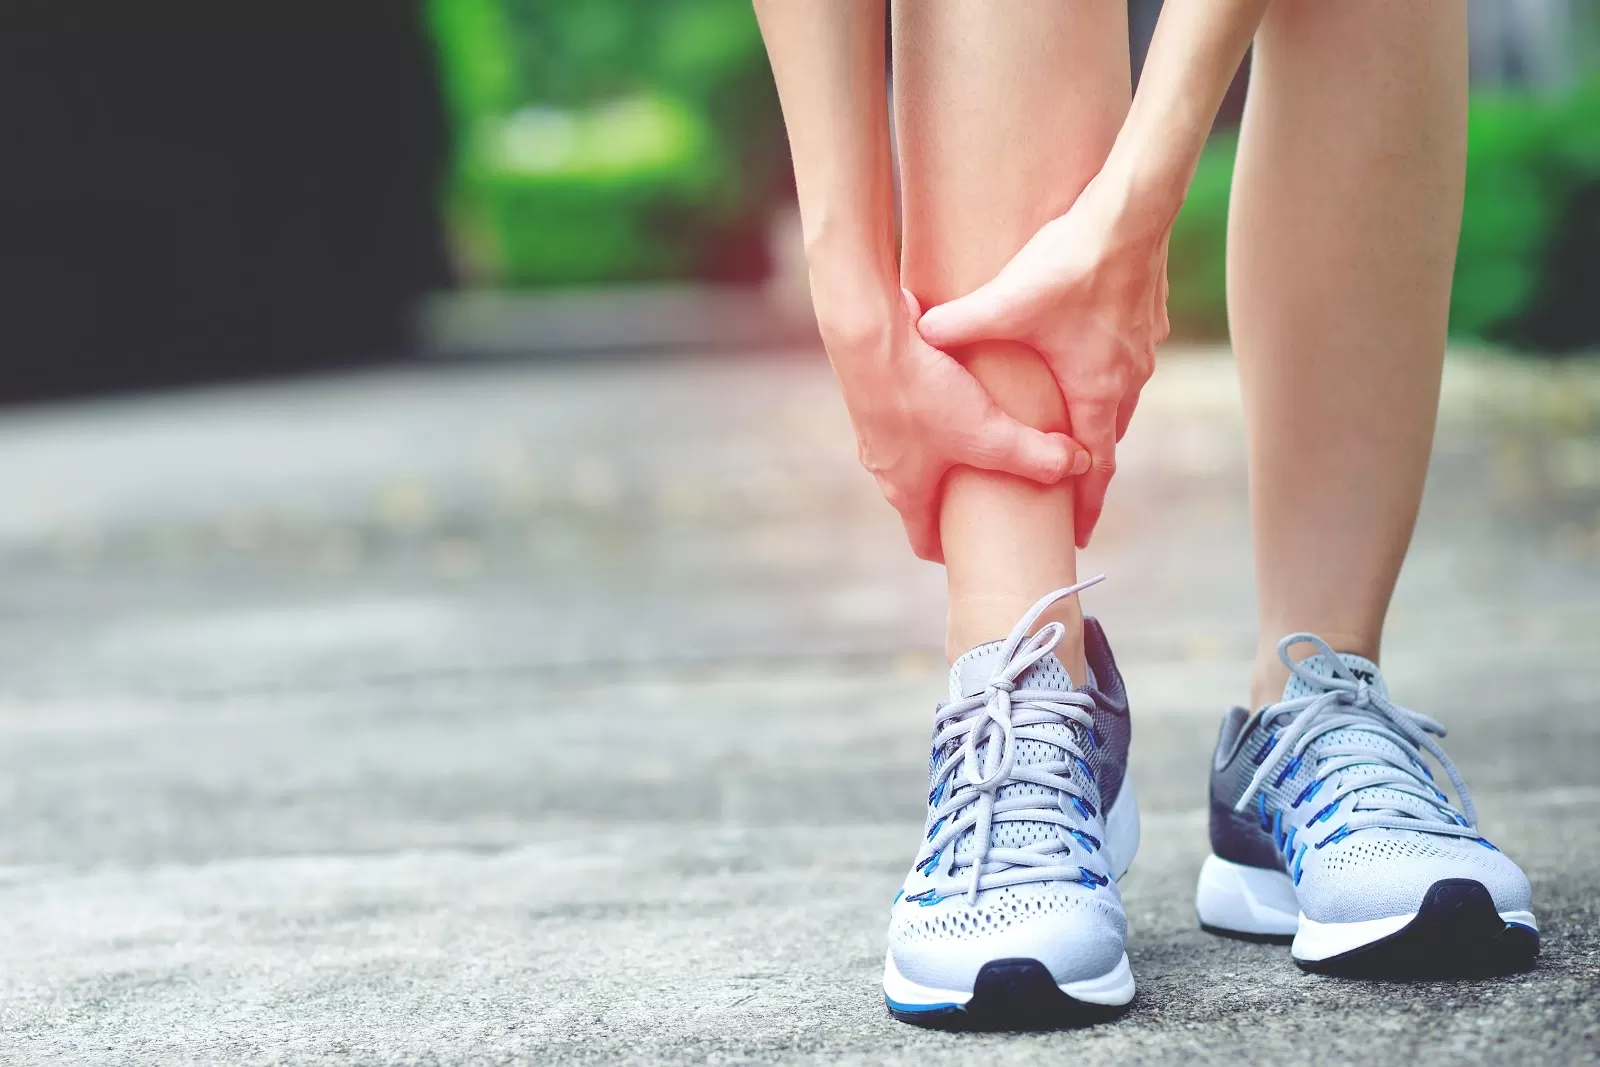 Shin Splints: The Why and the How